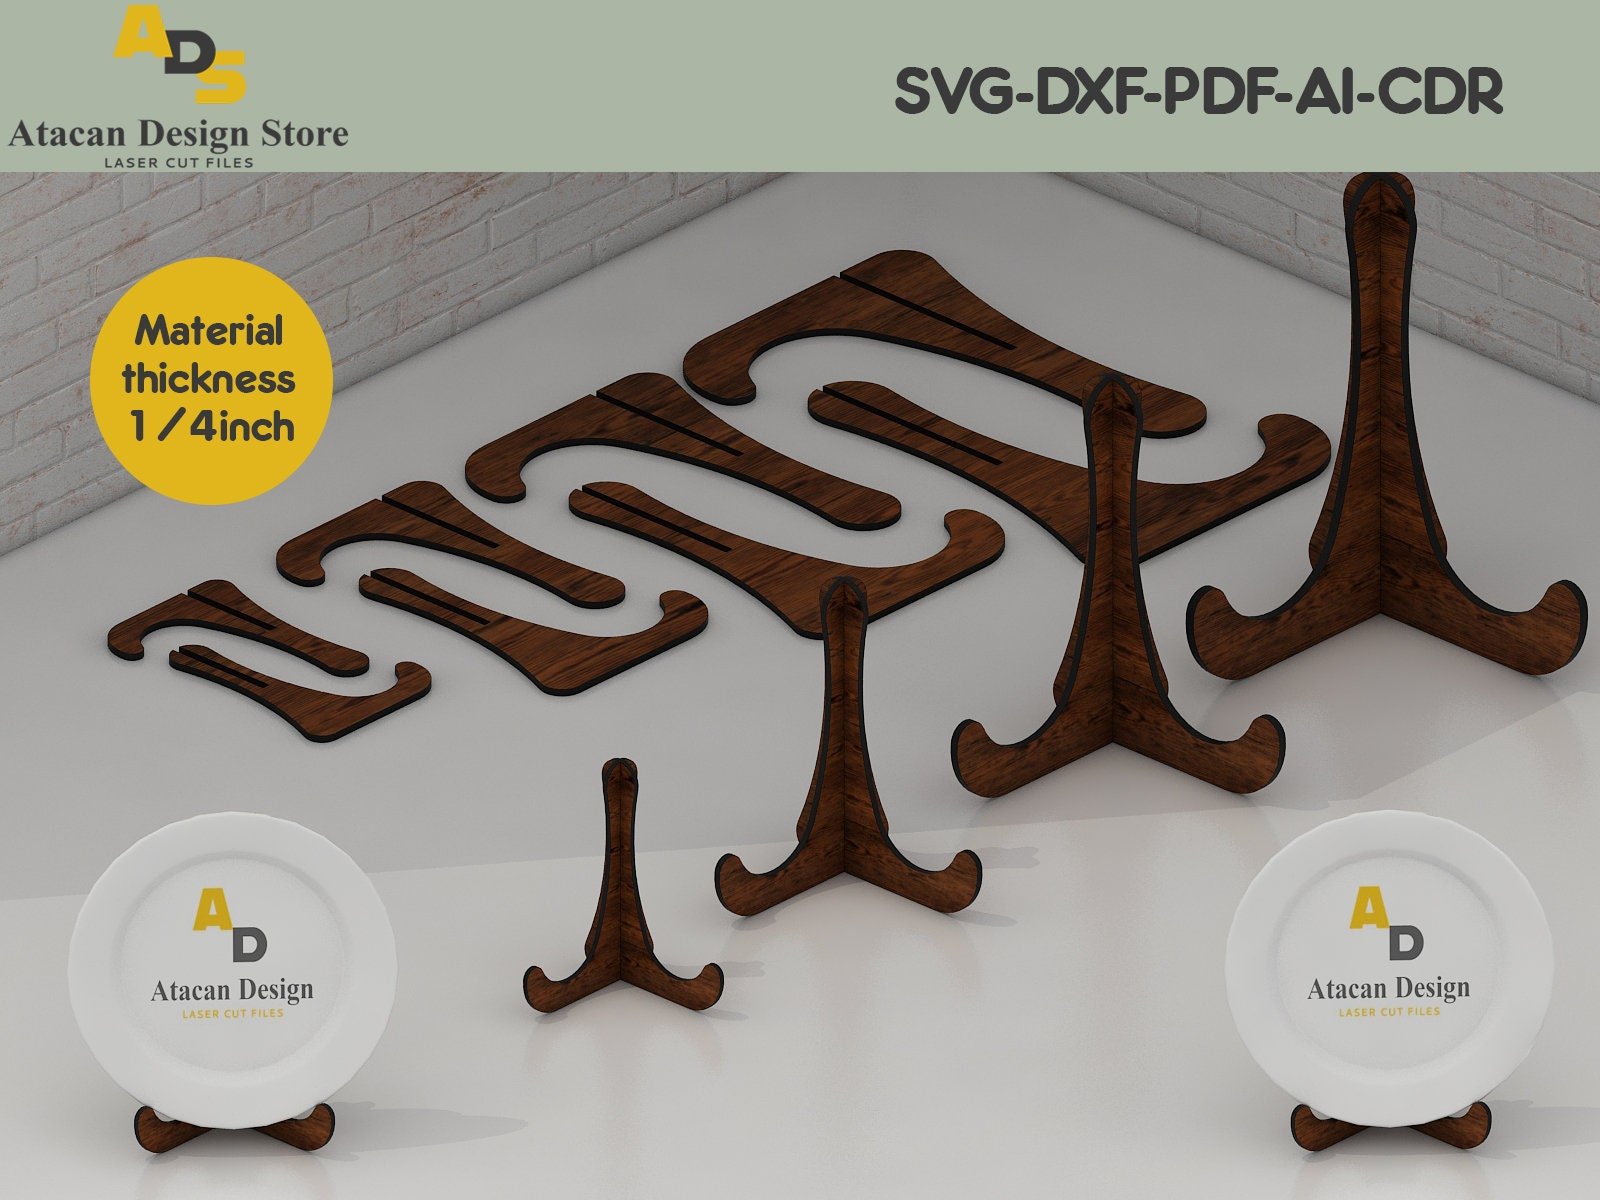 Easels for Display / Photo Stand / Laser Files / Instant Download / Glowforge svg files ADS037